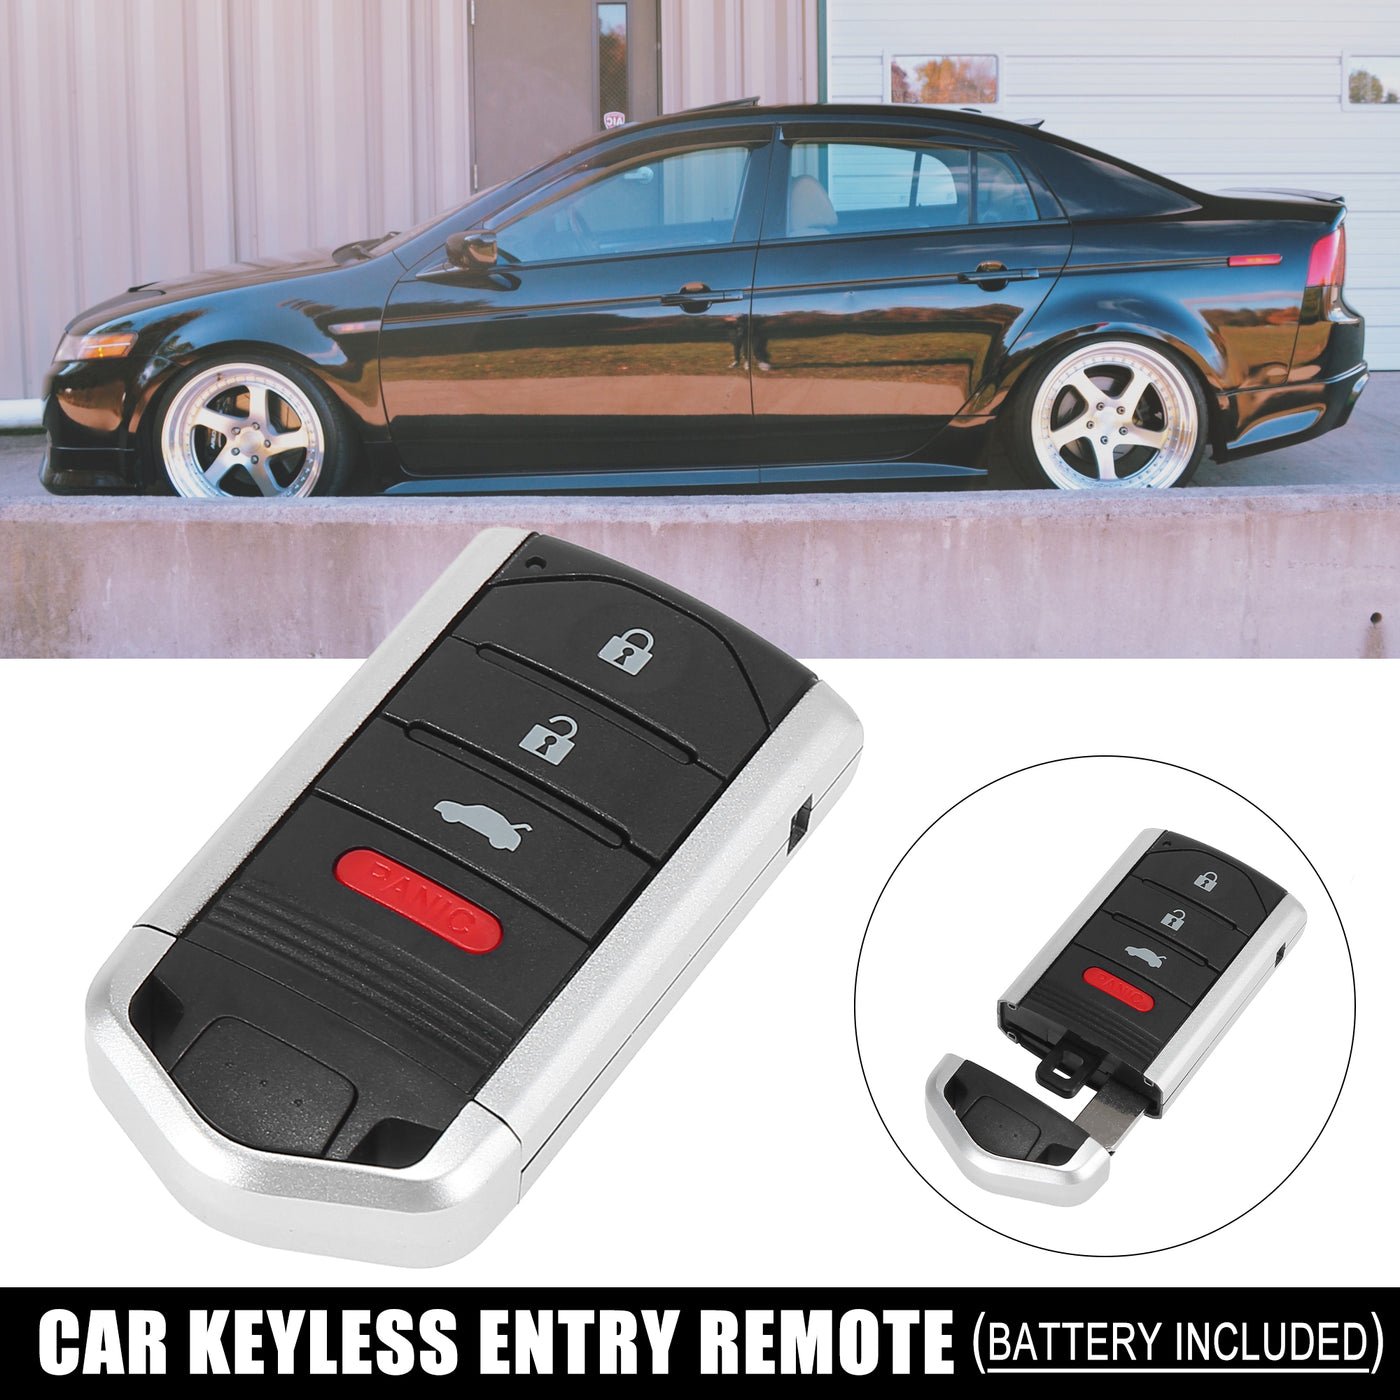 X AUTOHAUX 314MHz M3N5WY8145 Replacement Keyless Entry Remote Car Key Fob for Acura TL 2009 2010 2011 2012 2013 2014 267F-5WY8145  3+1 Buttons